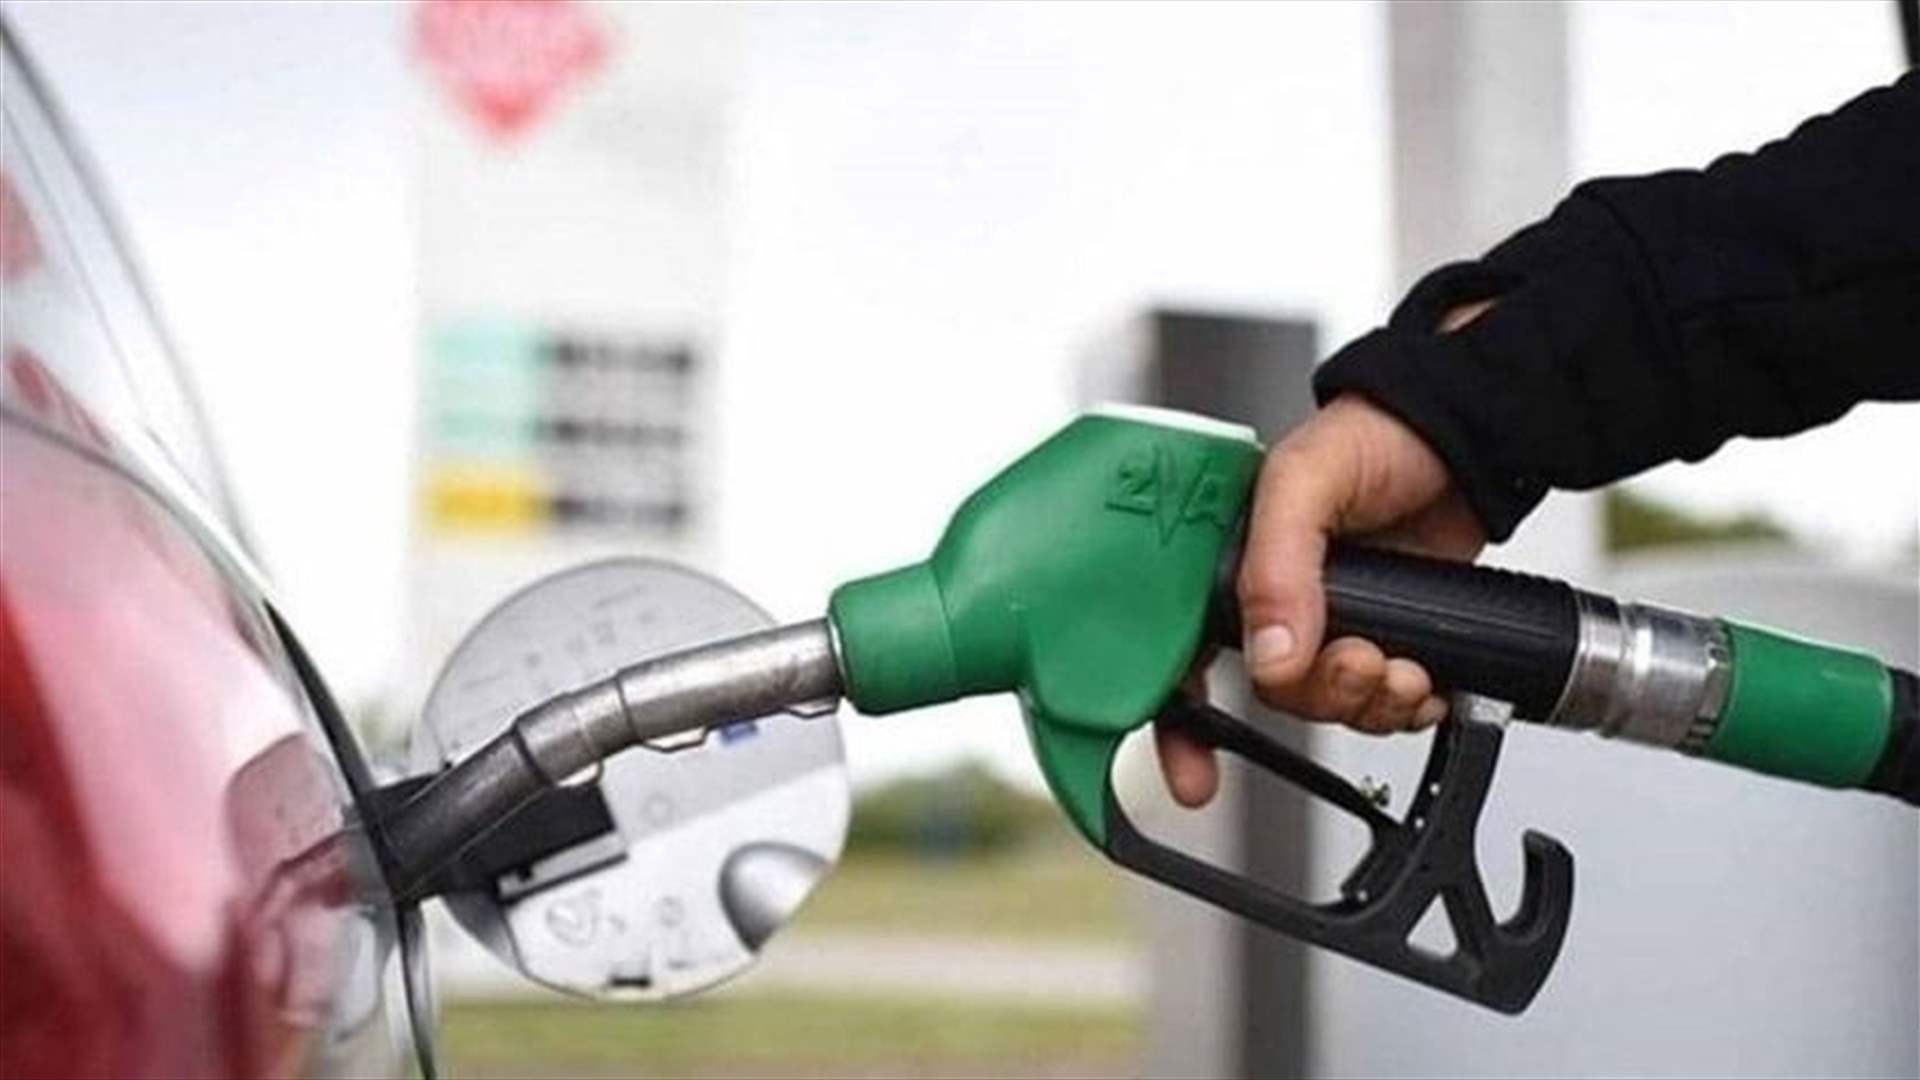 Price of gasoline increases by 7000 LBP